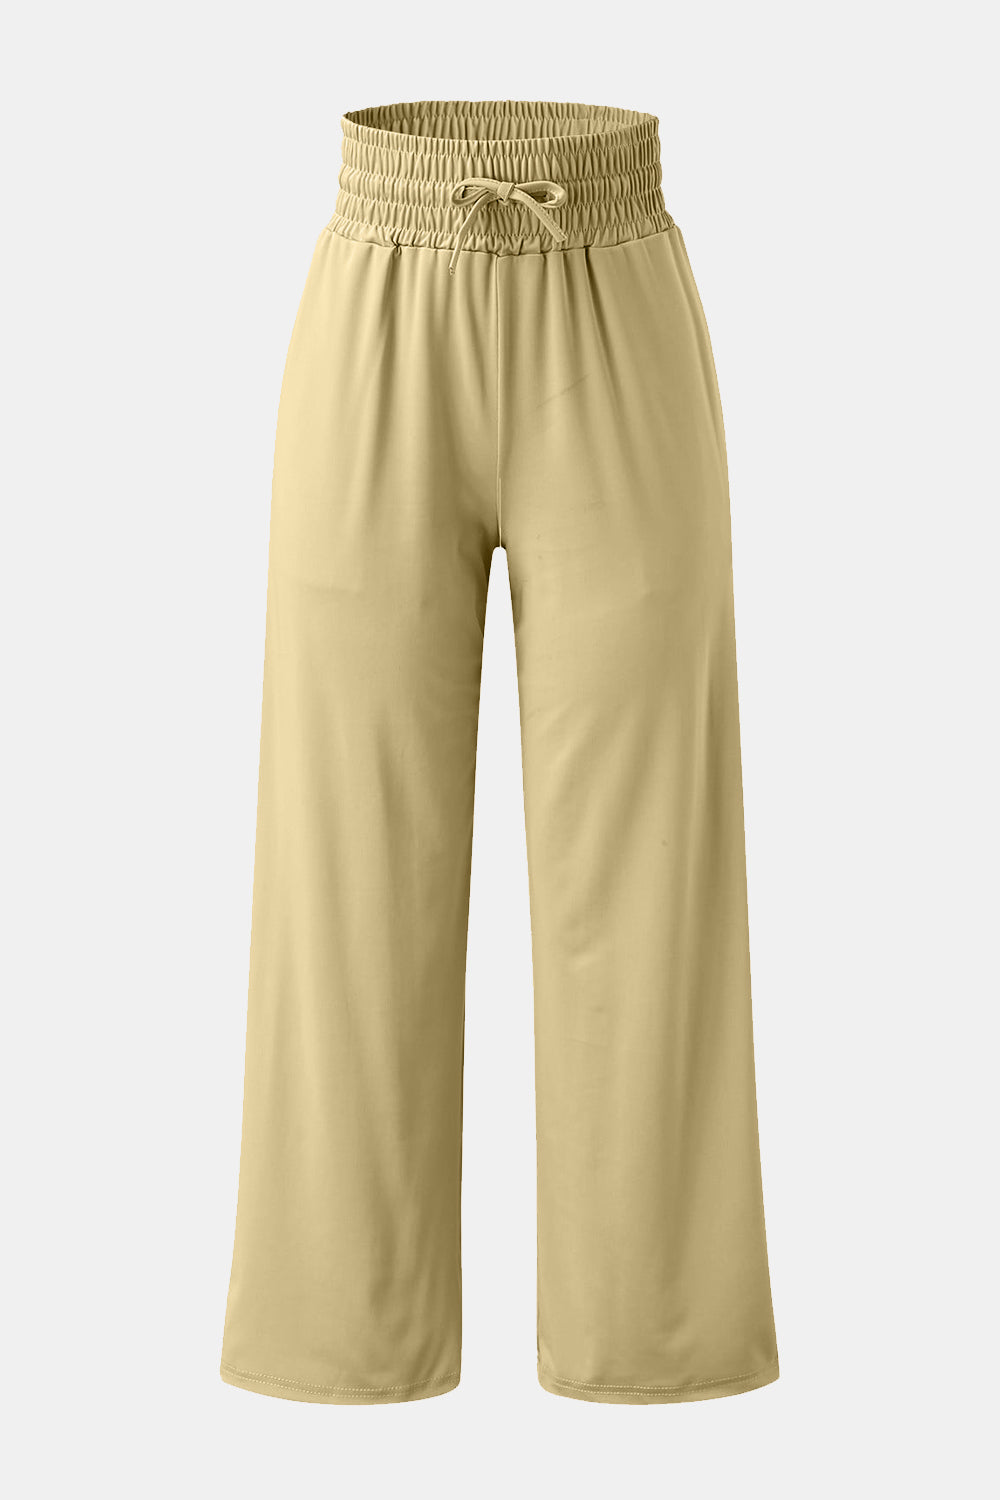 High-waisted wide-leg pants with a drawstring tie in multiple colors.